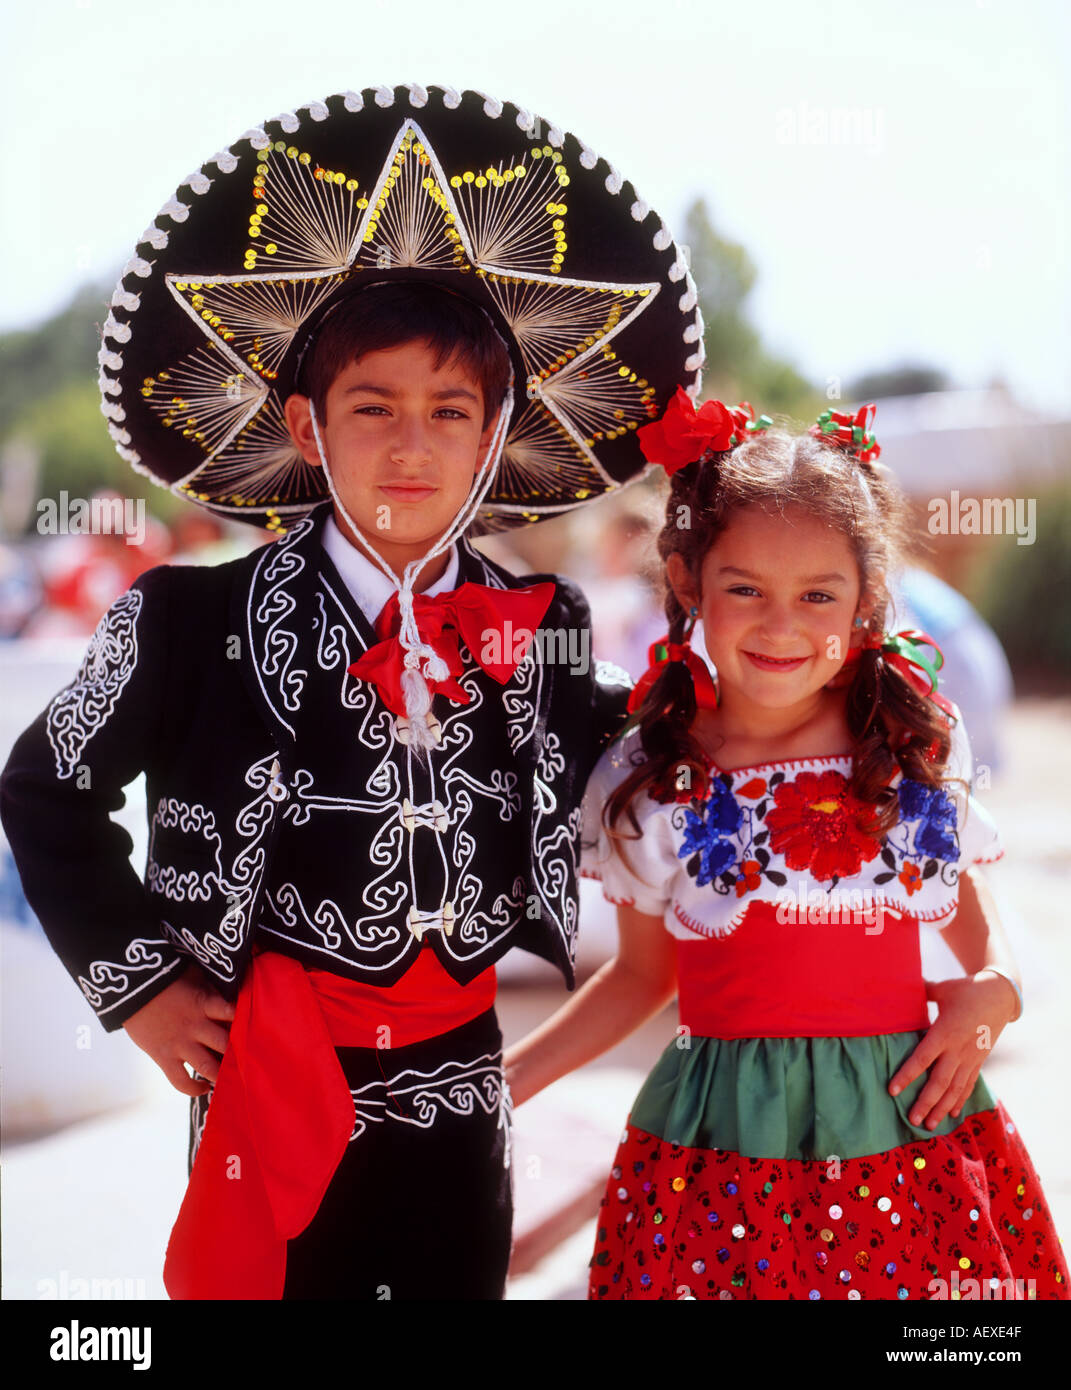 Children in National Costume MEXICO Stock Photo - Alamy